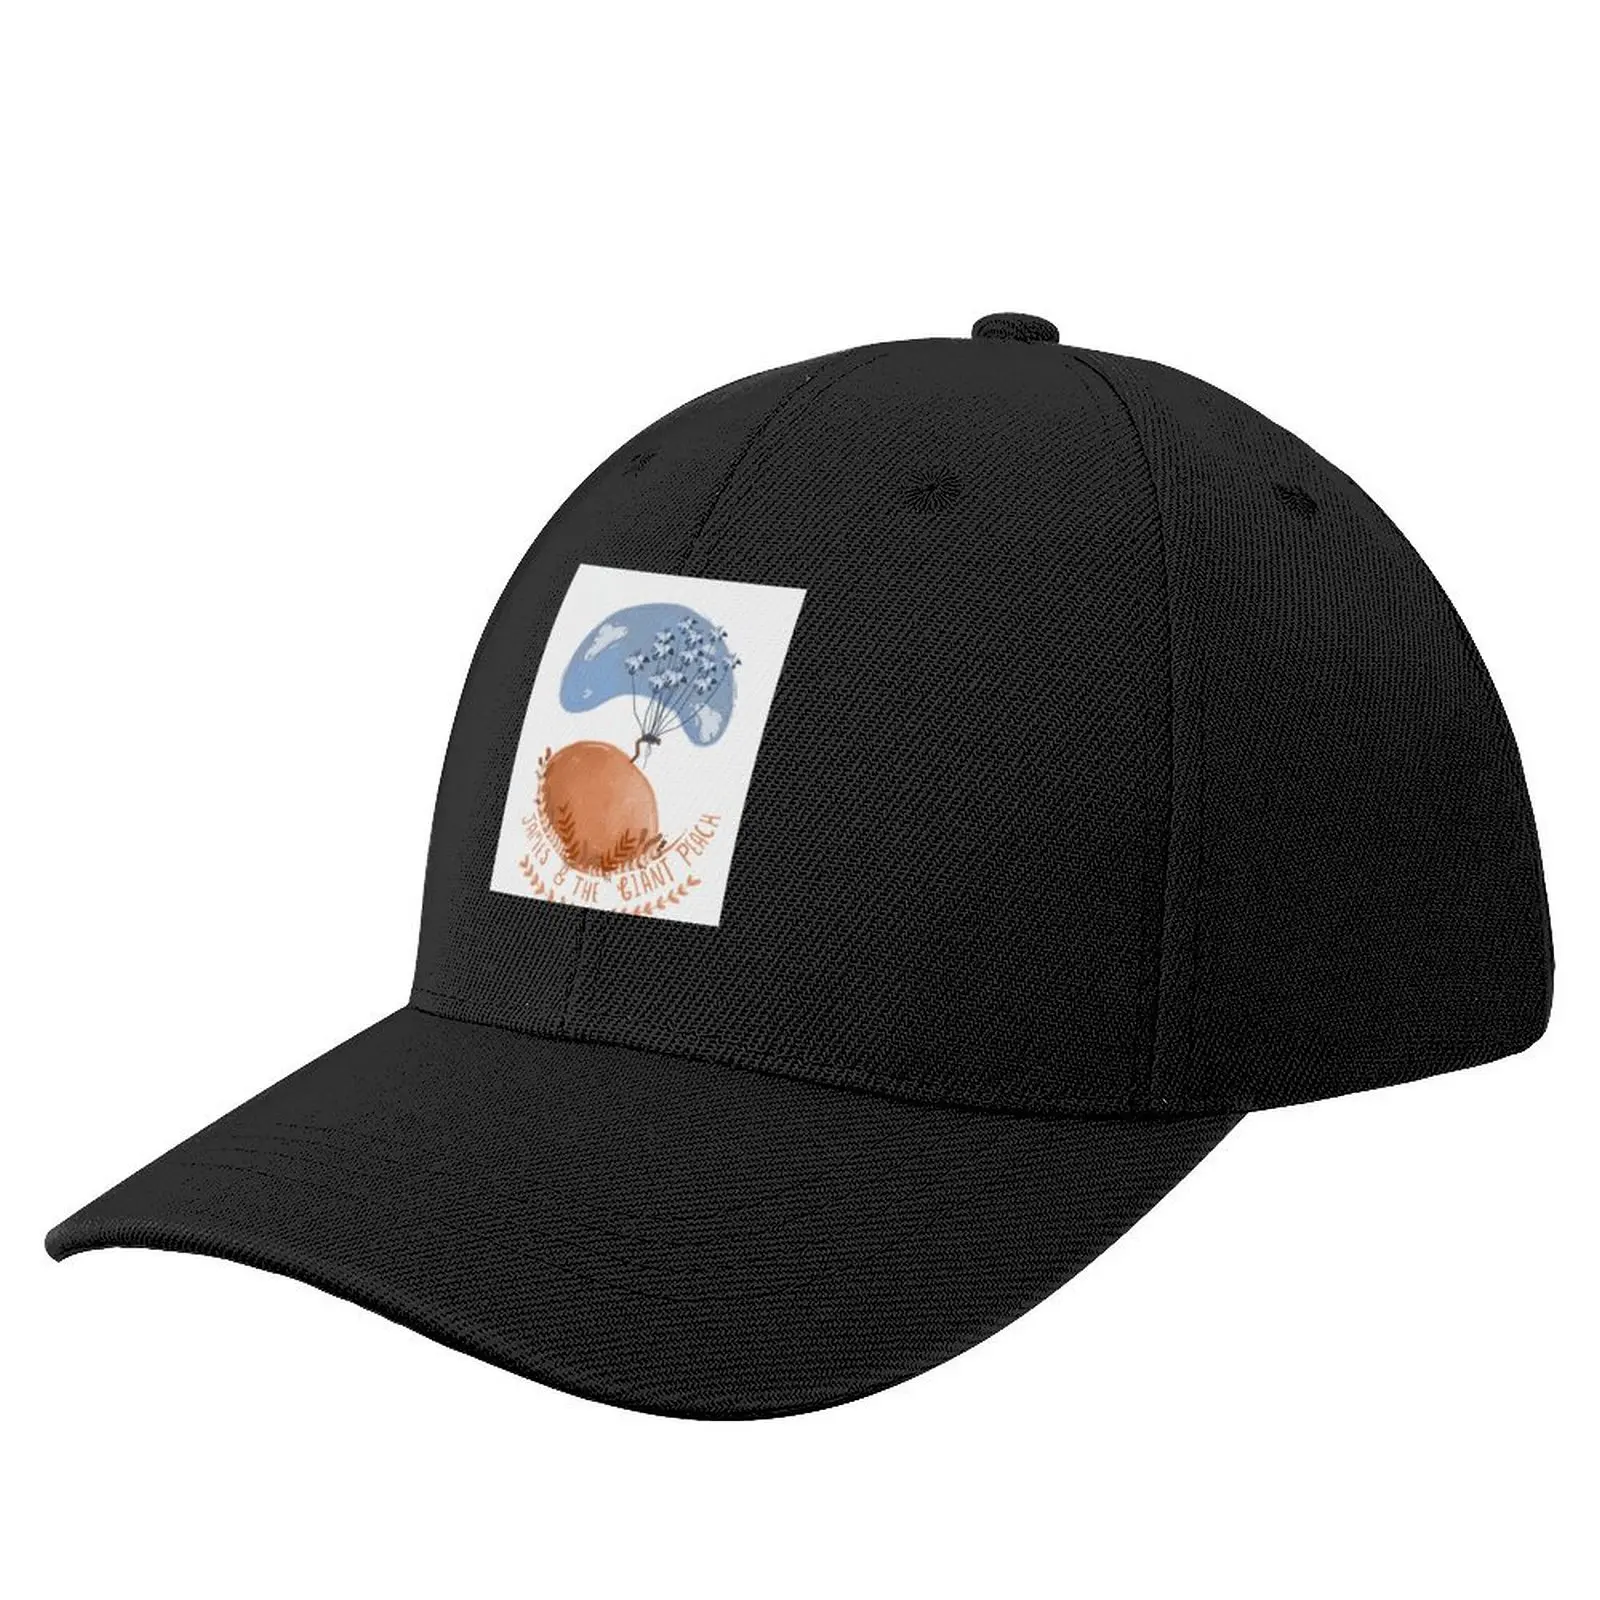 

James And The Giant Peach Baseball Cap Luxury Man Hat Vintage Women's Golf Clothing Men's